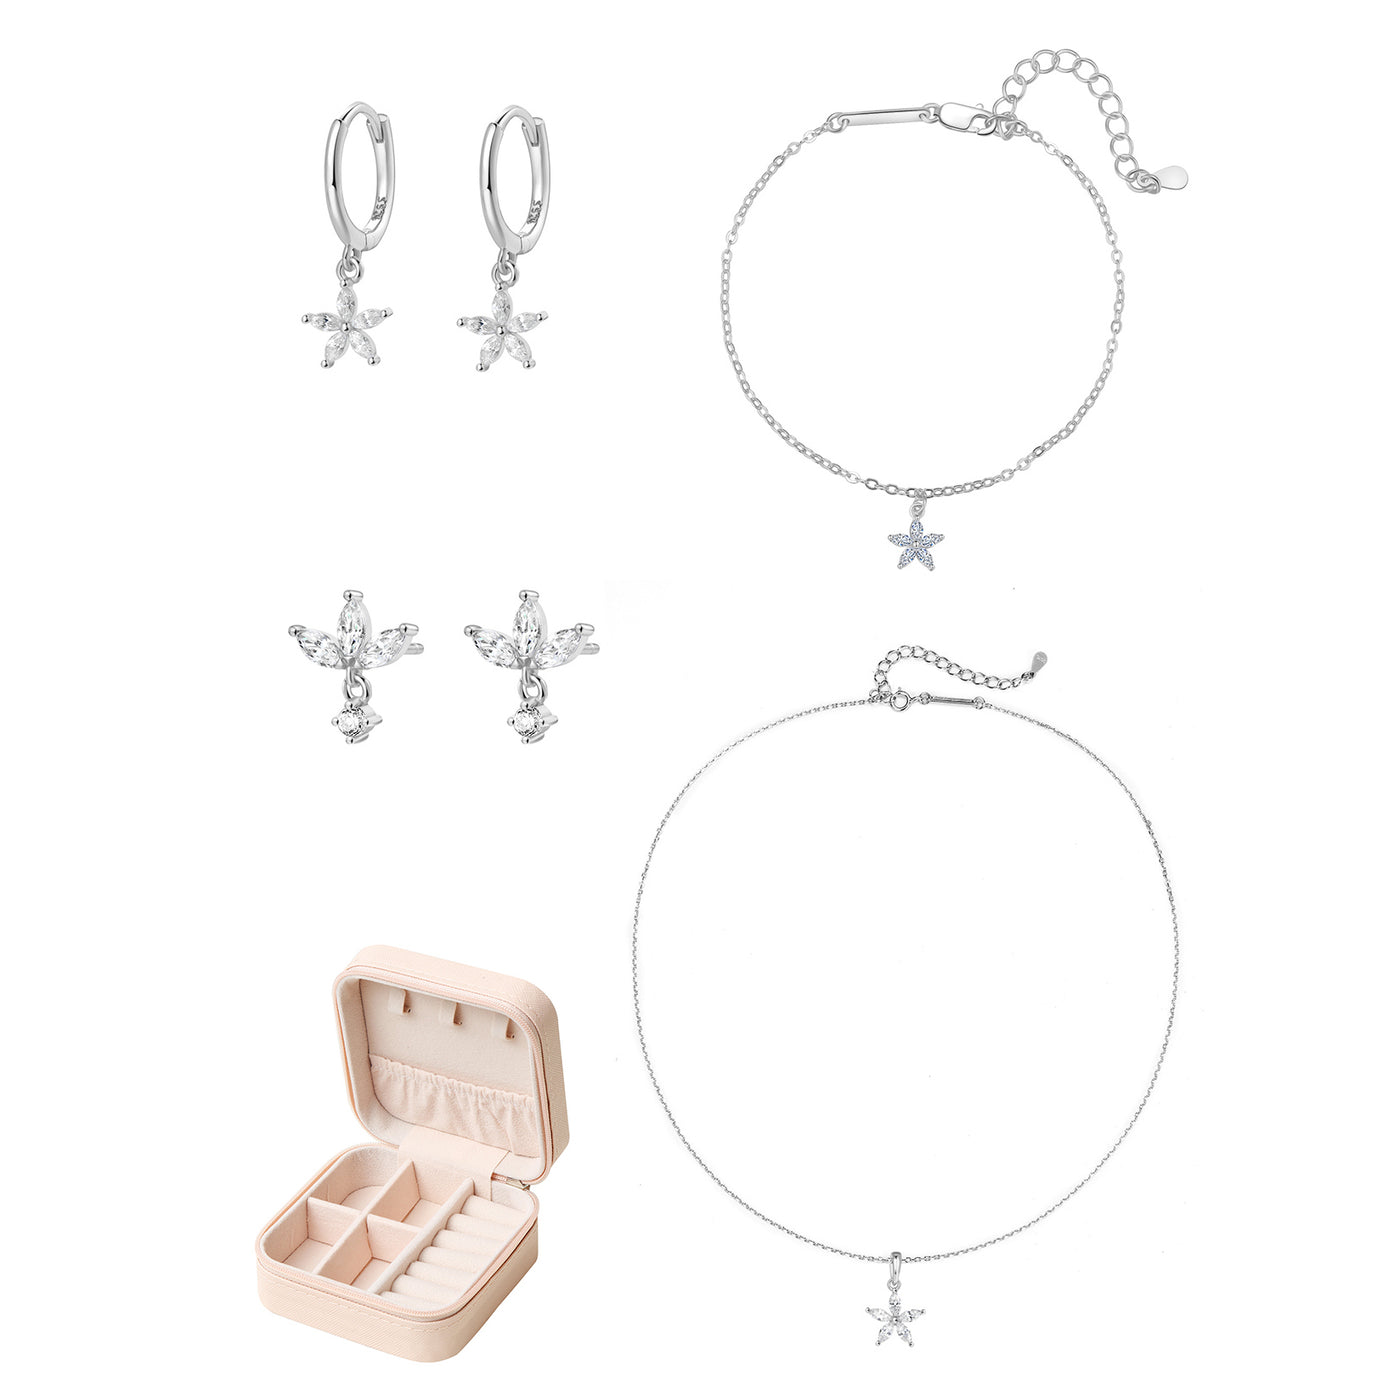 Daisy Sterling Silver Jewelry and Case Set